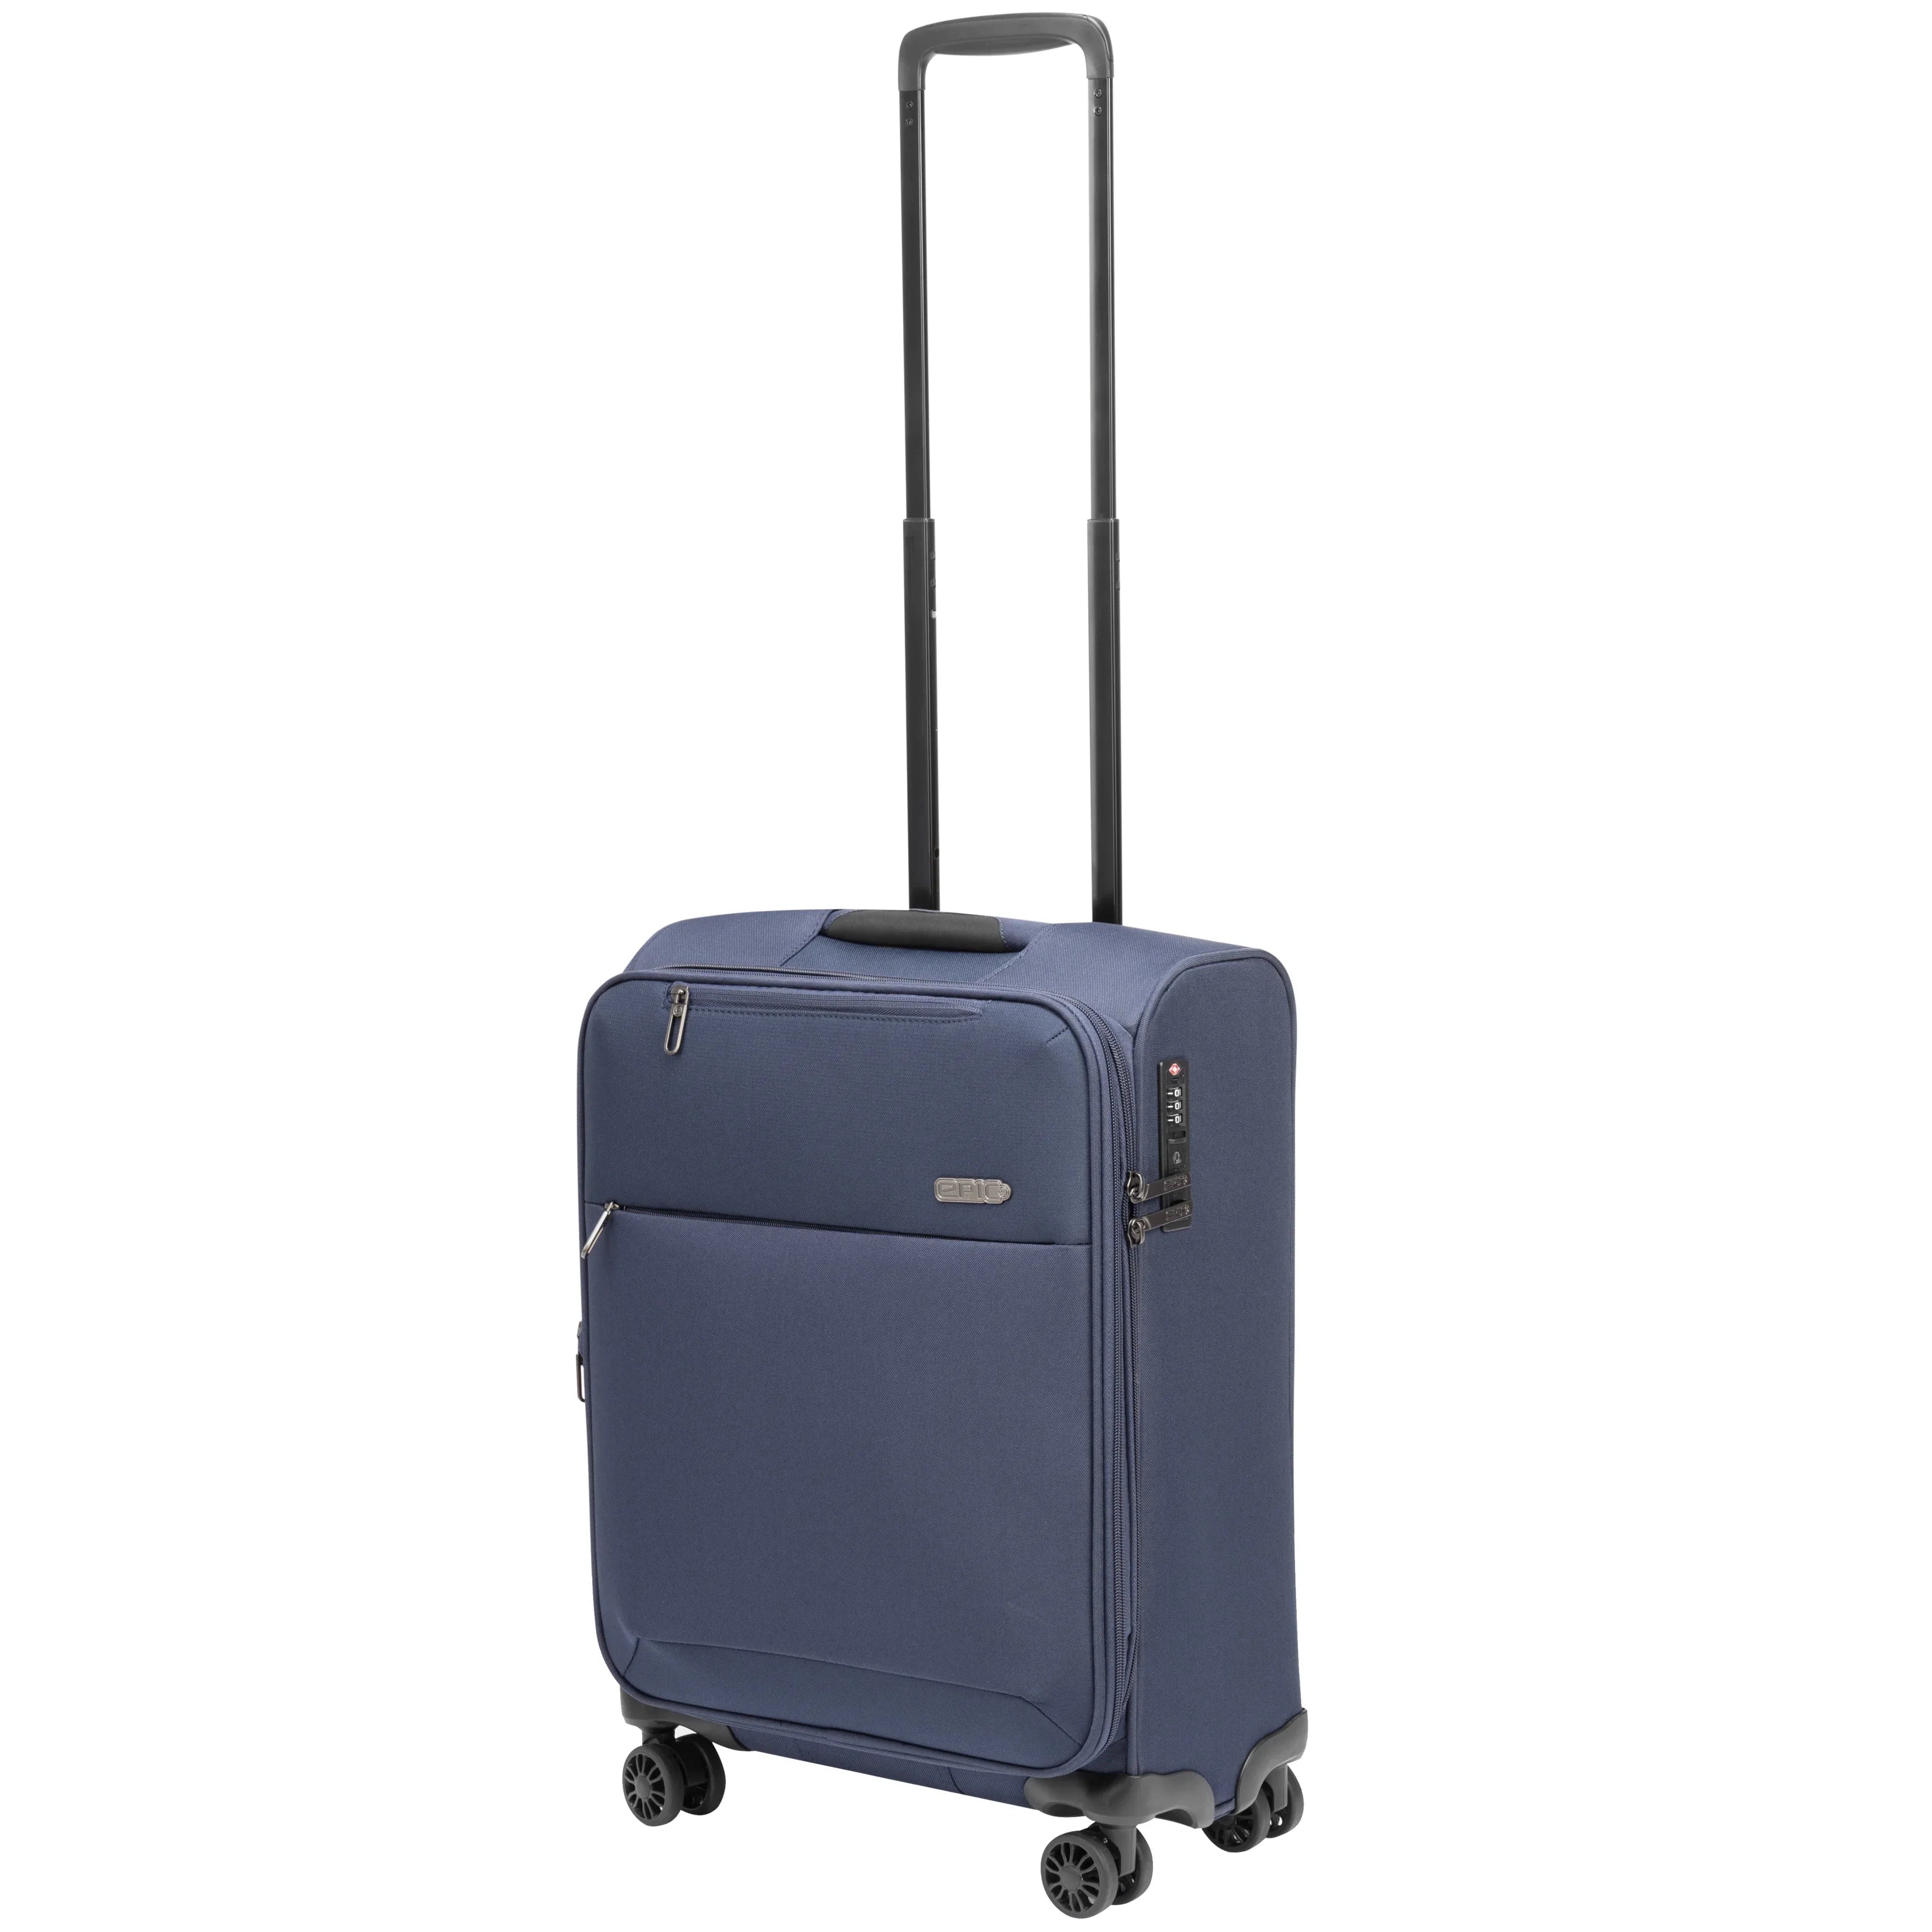 Epic Discovery Neo trolley 4 roues 55 cm - bleu marine